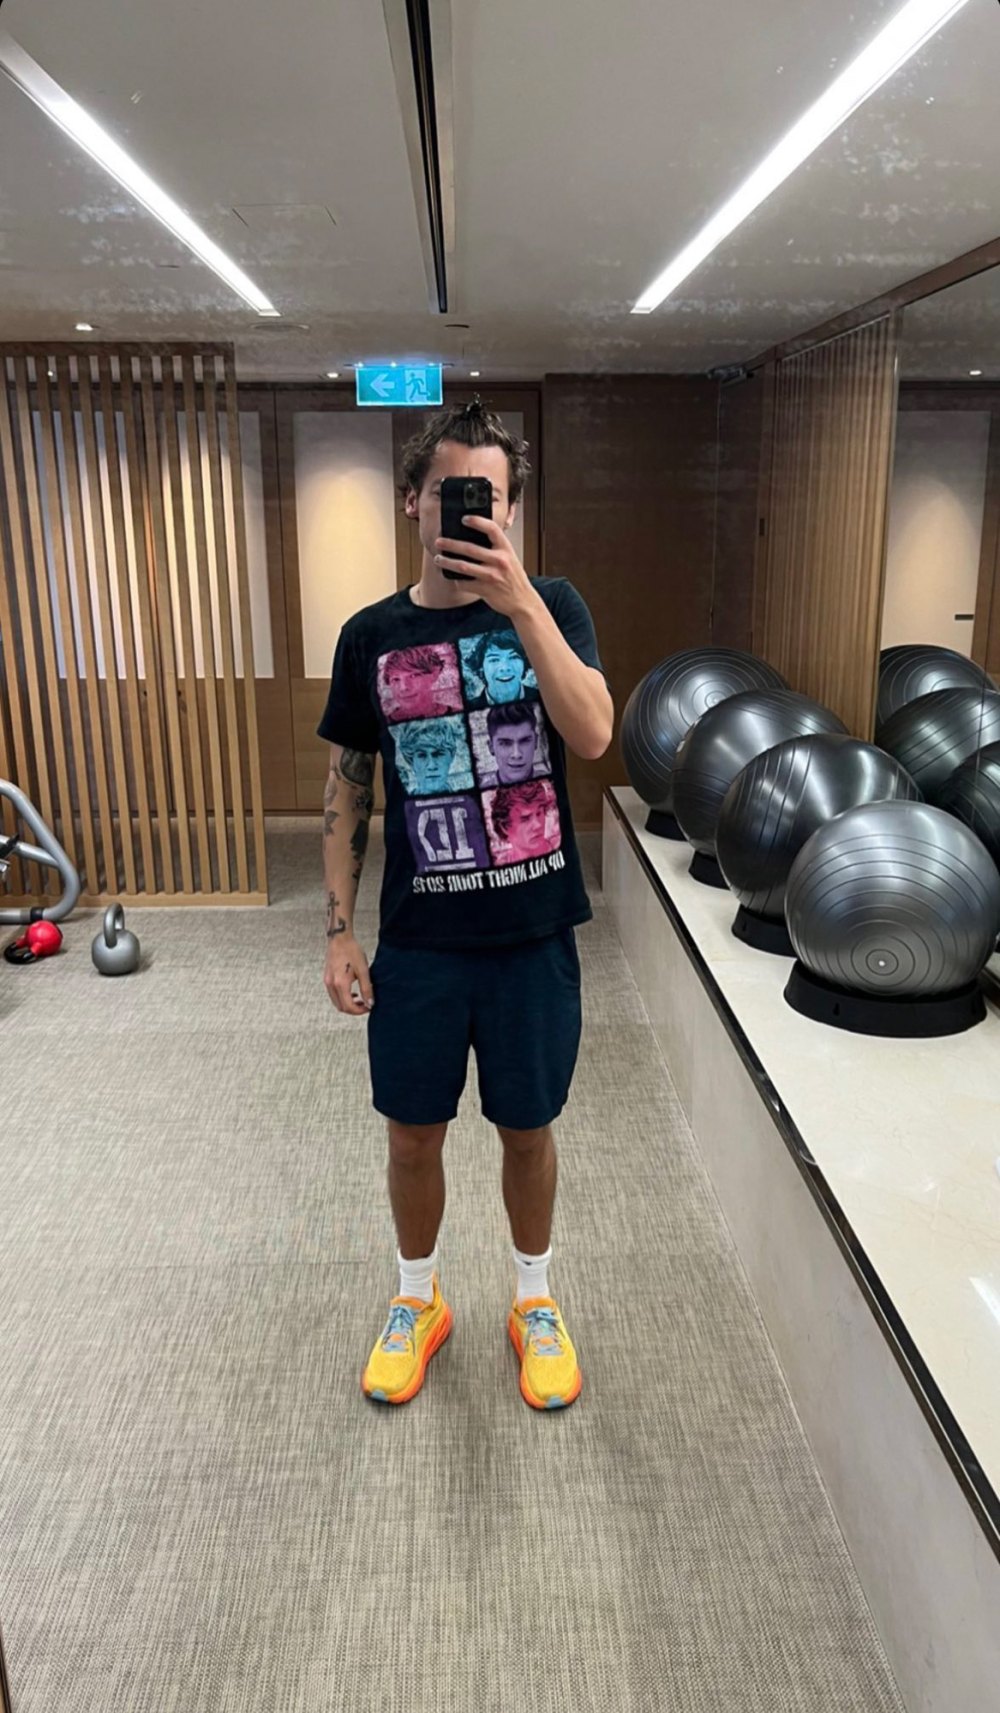 Harry Posts Gym Wearing One Direction Shirt: Details